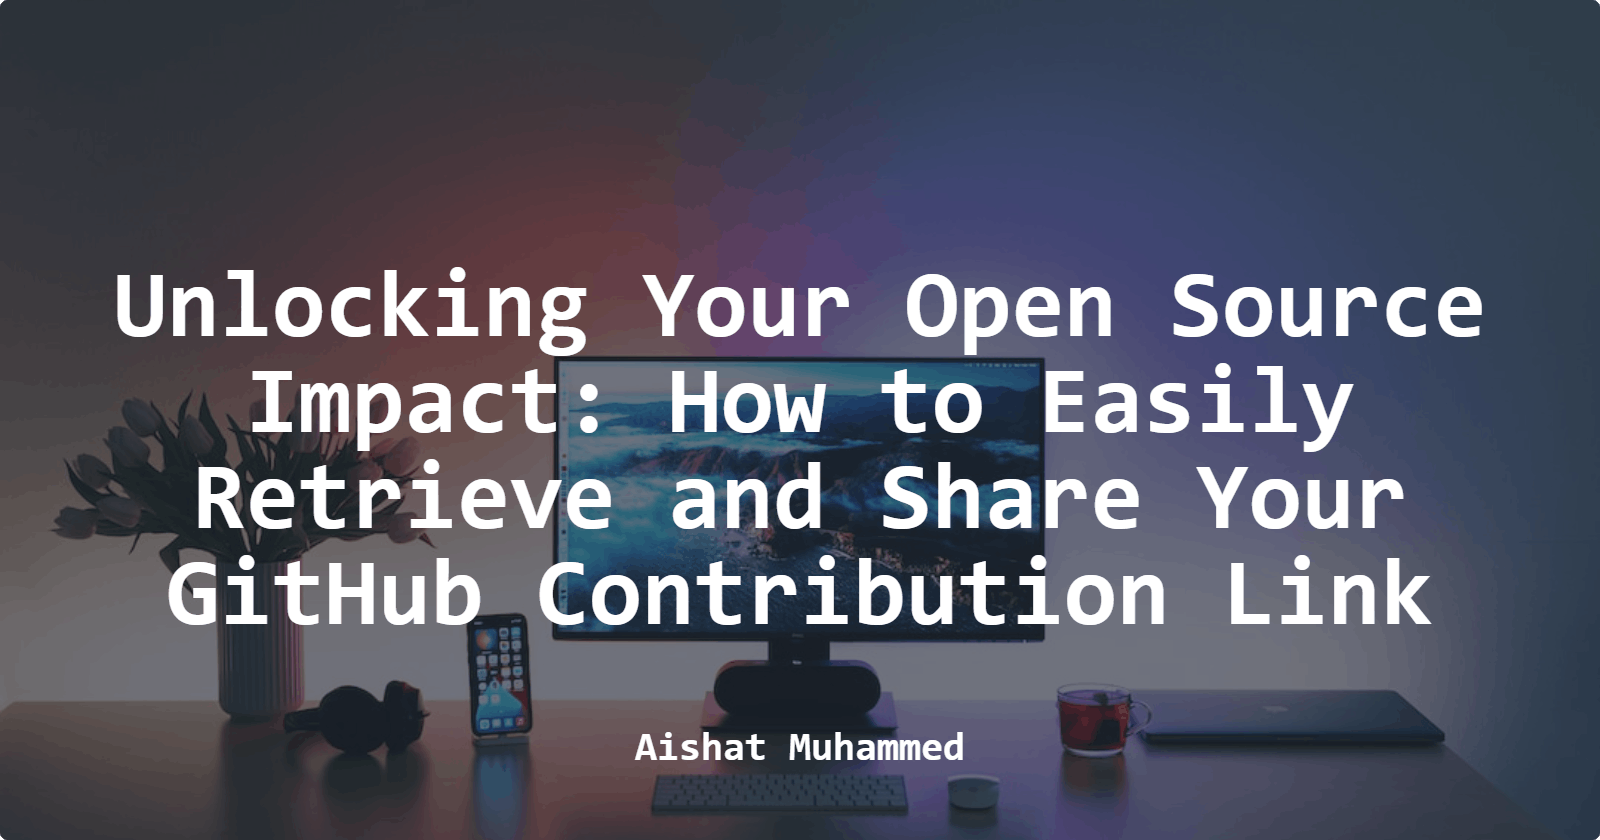 Unlocking Your Open Source Impact: How to Easily Retrieve and Share Your GitHub Contribution Link